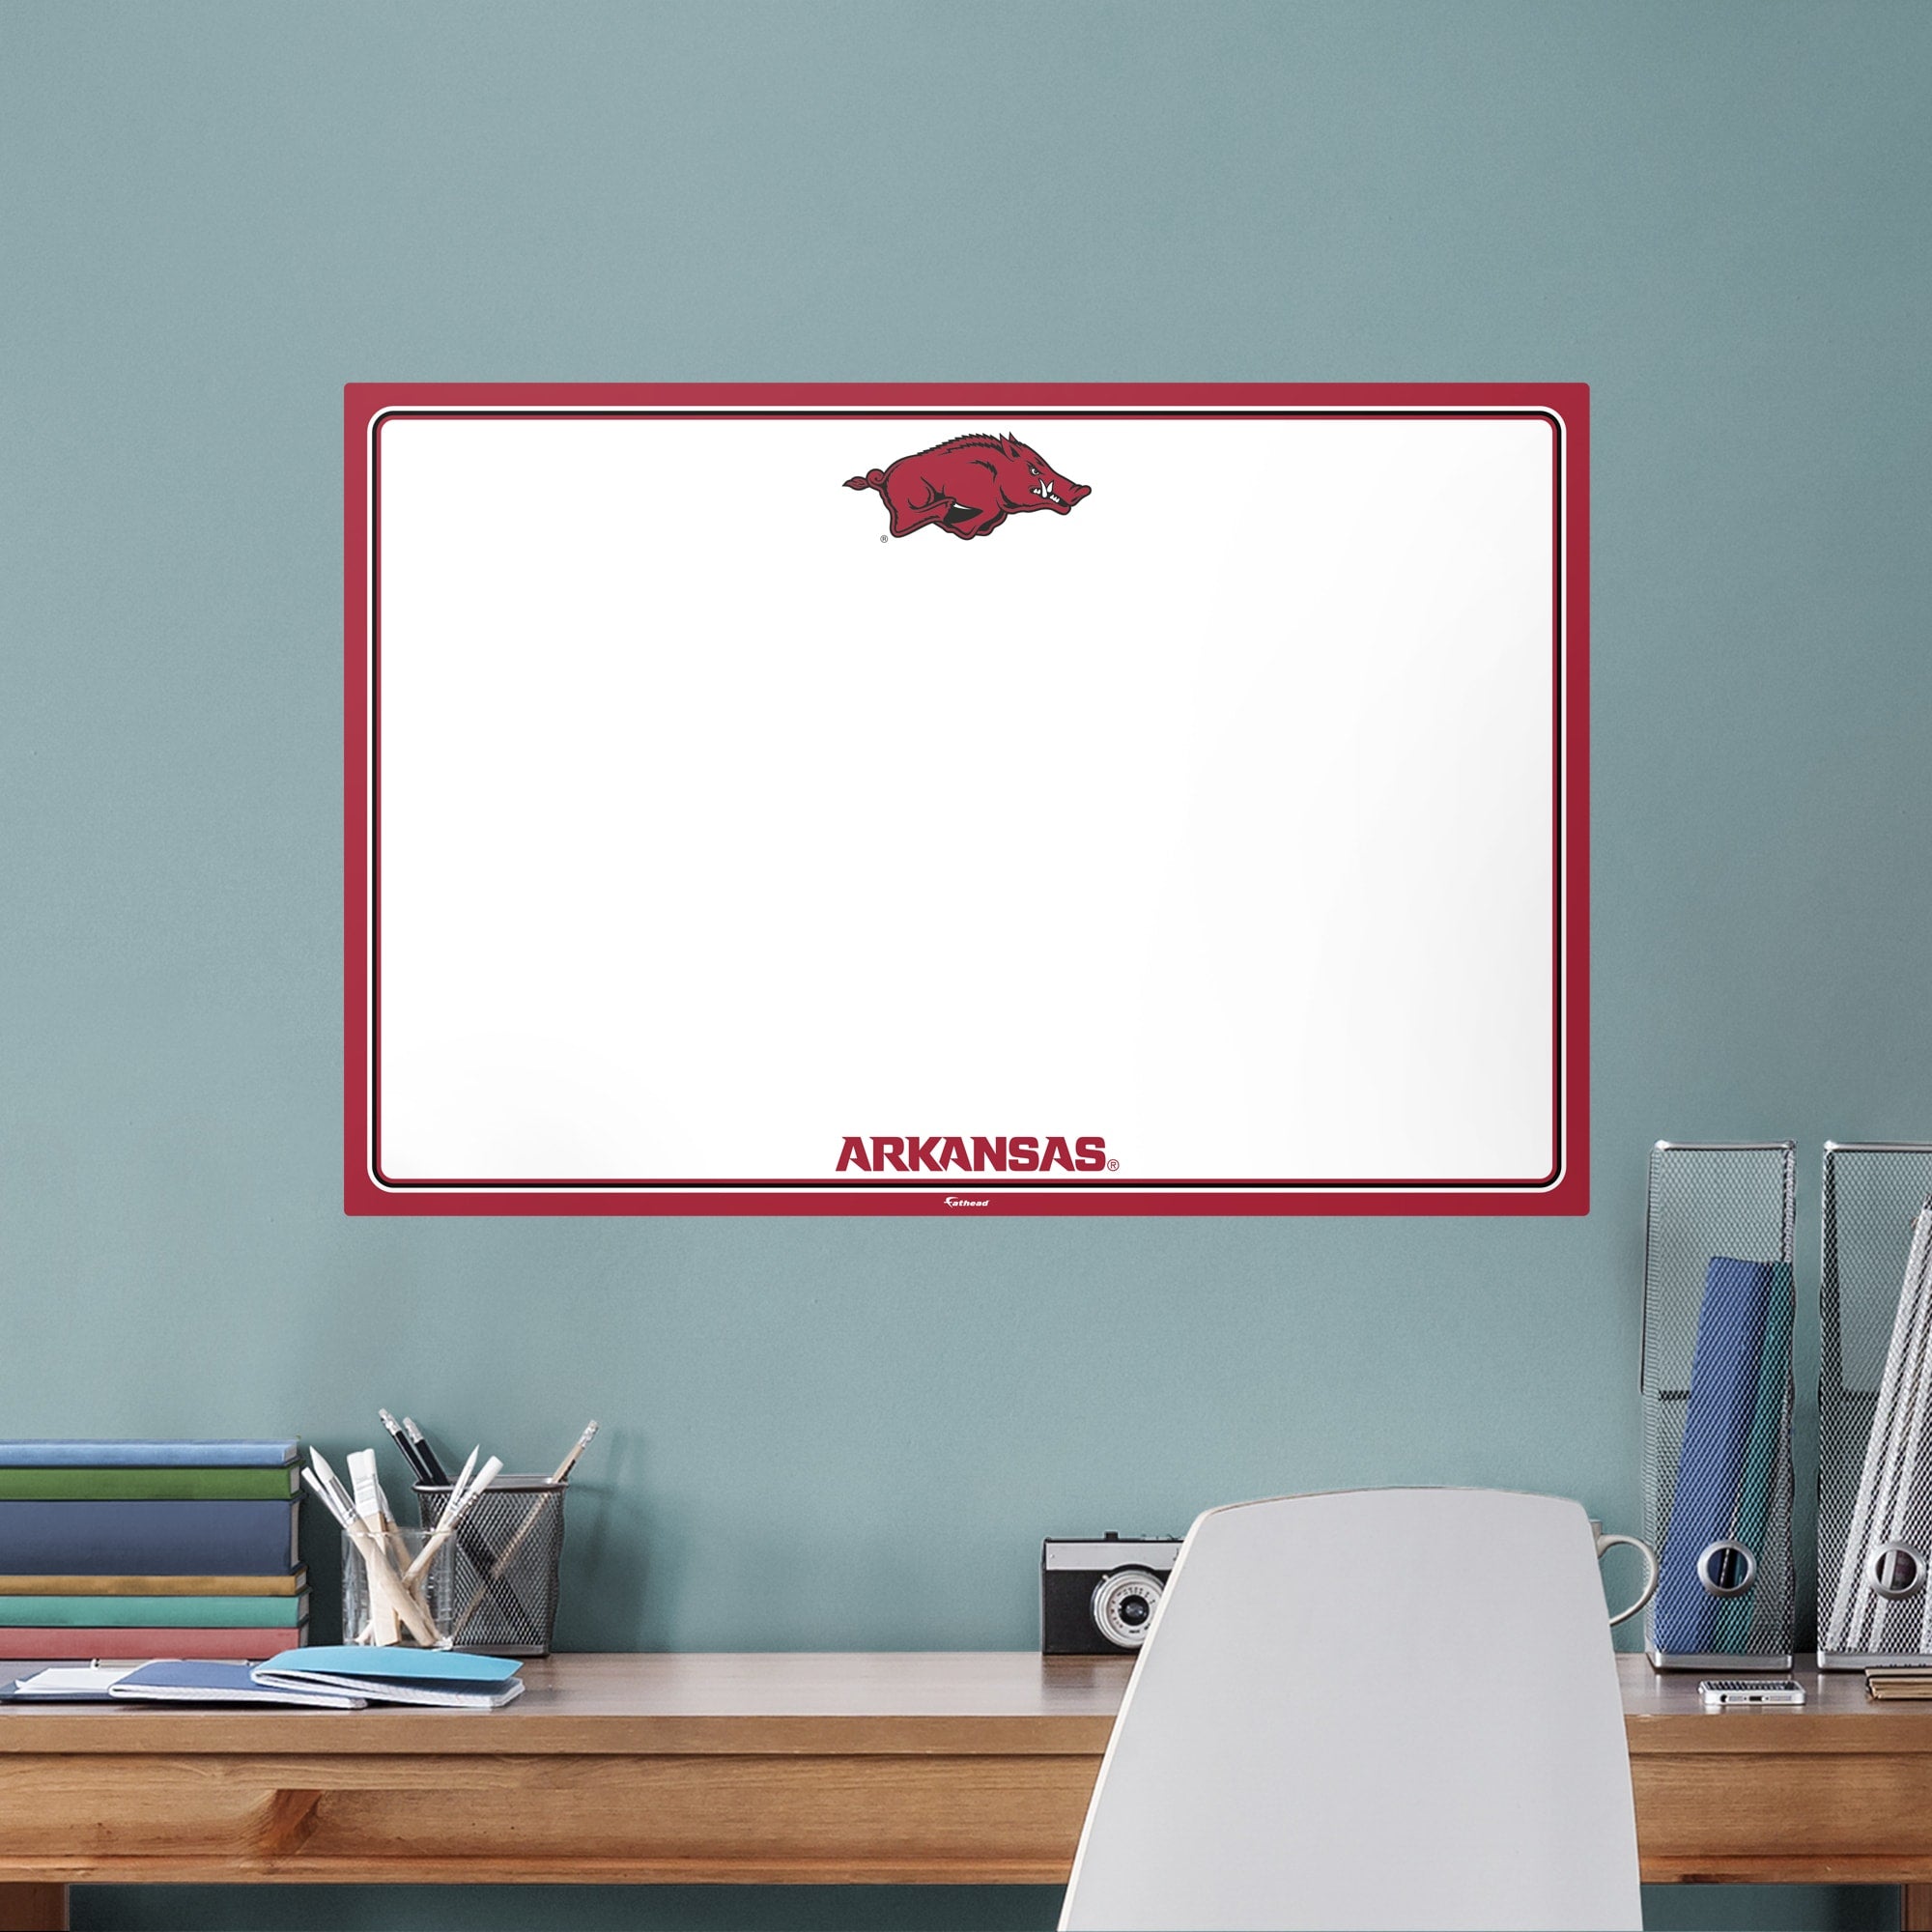 Arkansas Razorbacks: Dry Erase Whiteboard - X-Large Officially Licensed NCAA Removable Wall Decal XL by Fathead | Vinyl